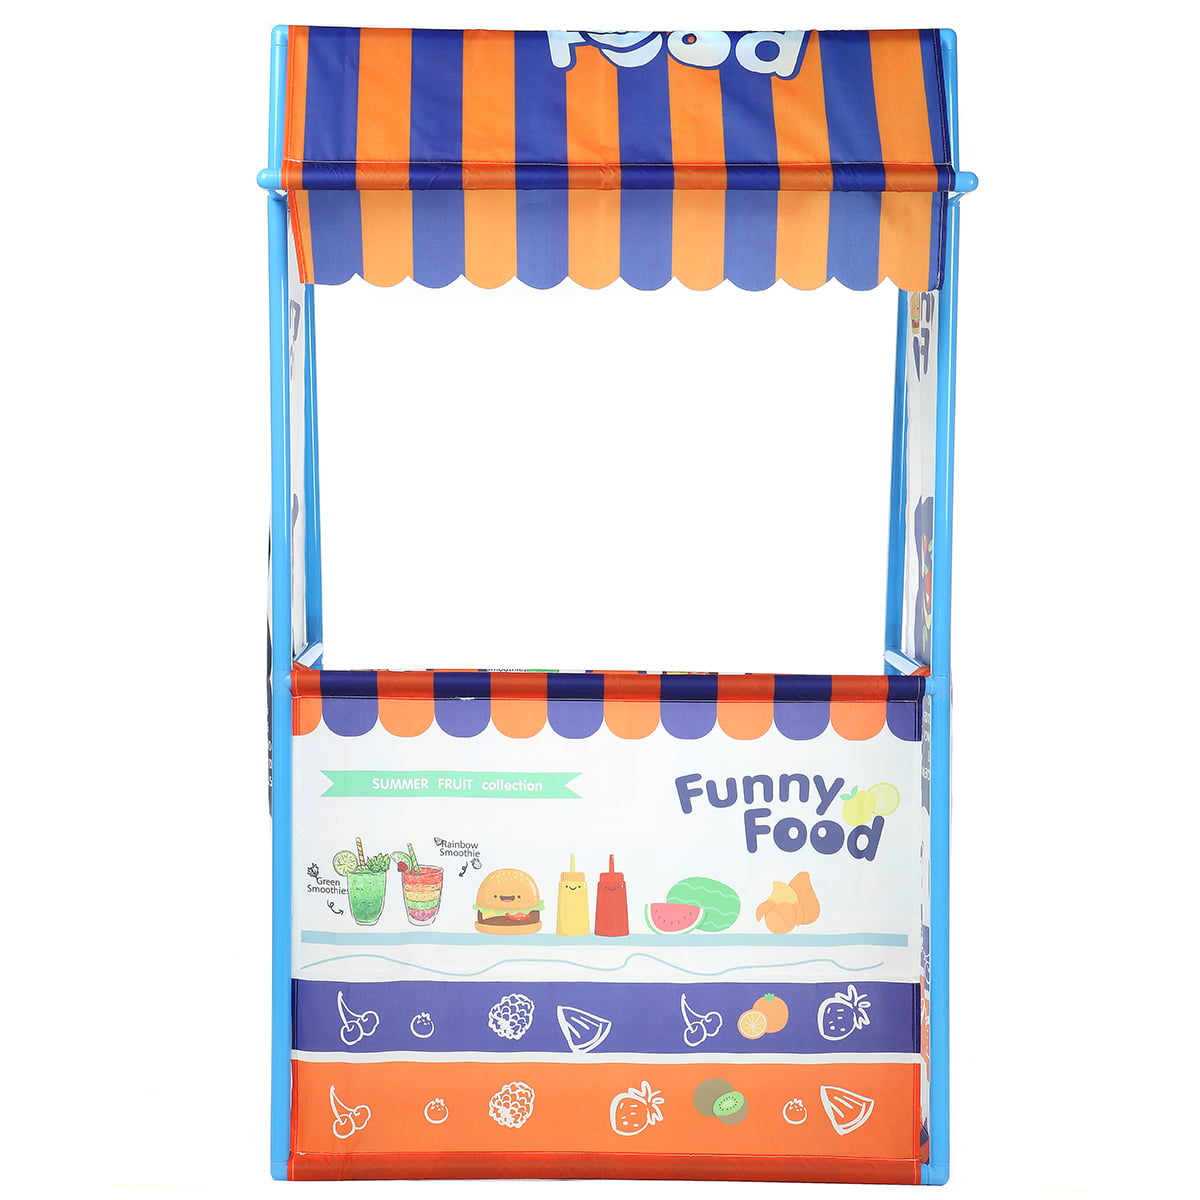 Portable Play Store and 2 Pretend Food Playhouse Indoor Outdoor Ice Cream Cart 